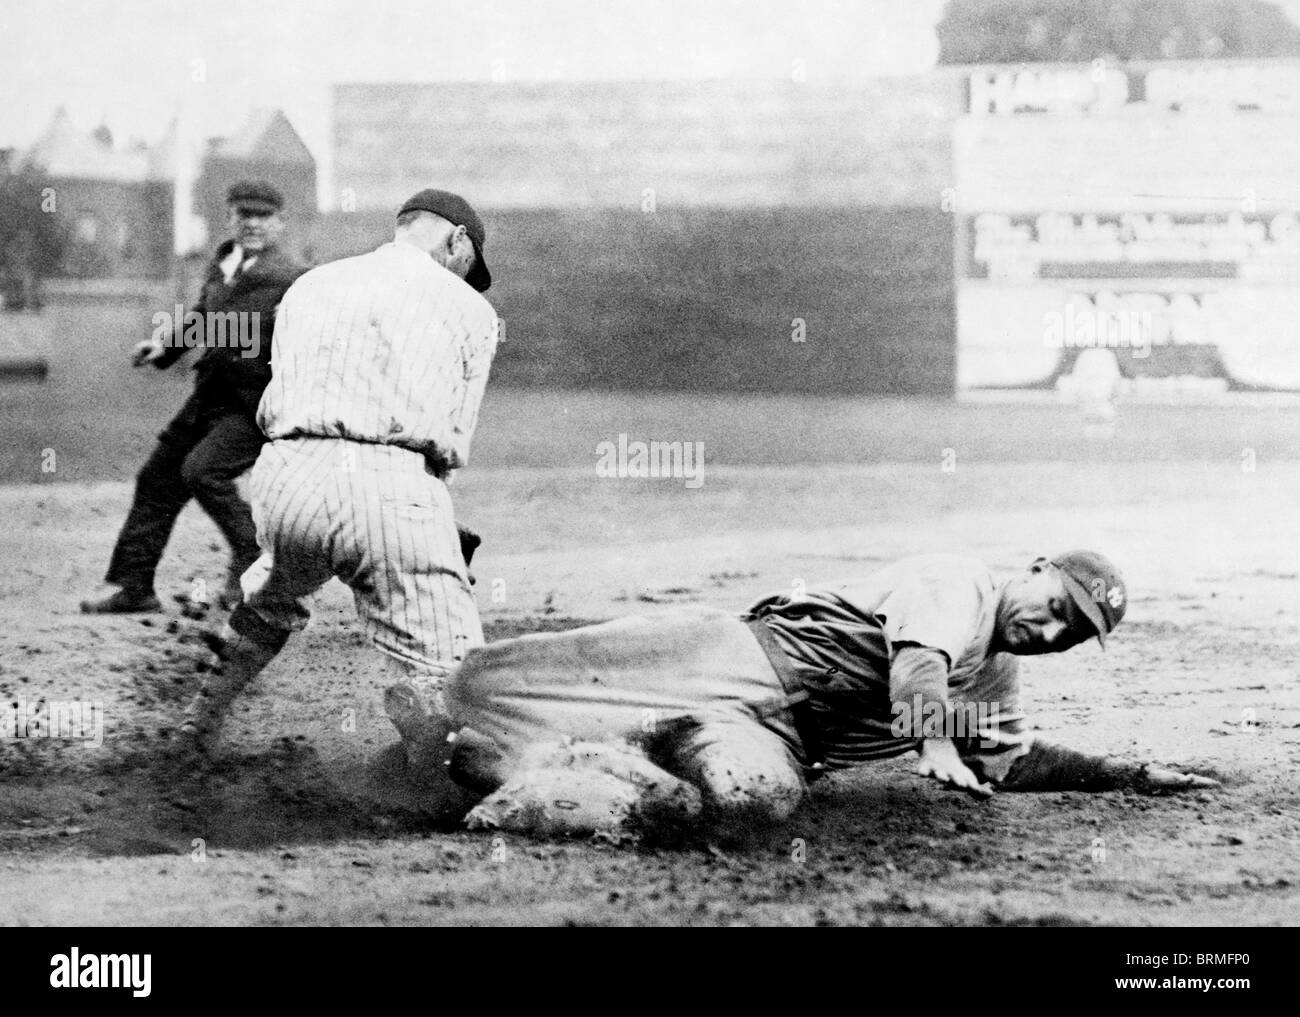 Umpire watches as New York Yankee player slides into base ahead of the tag during baseball game with Washington (circa 1920) Stock Photo